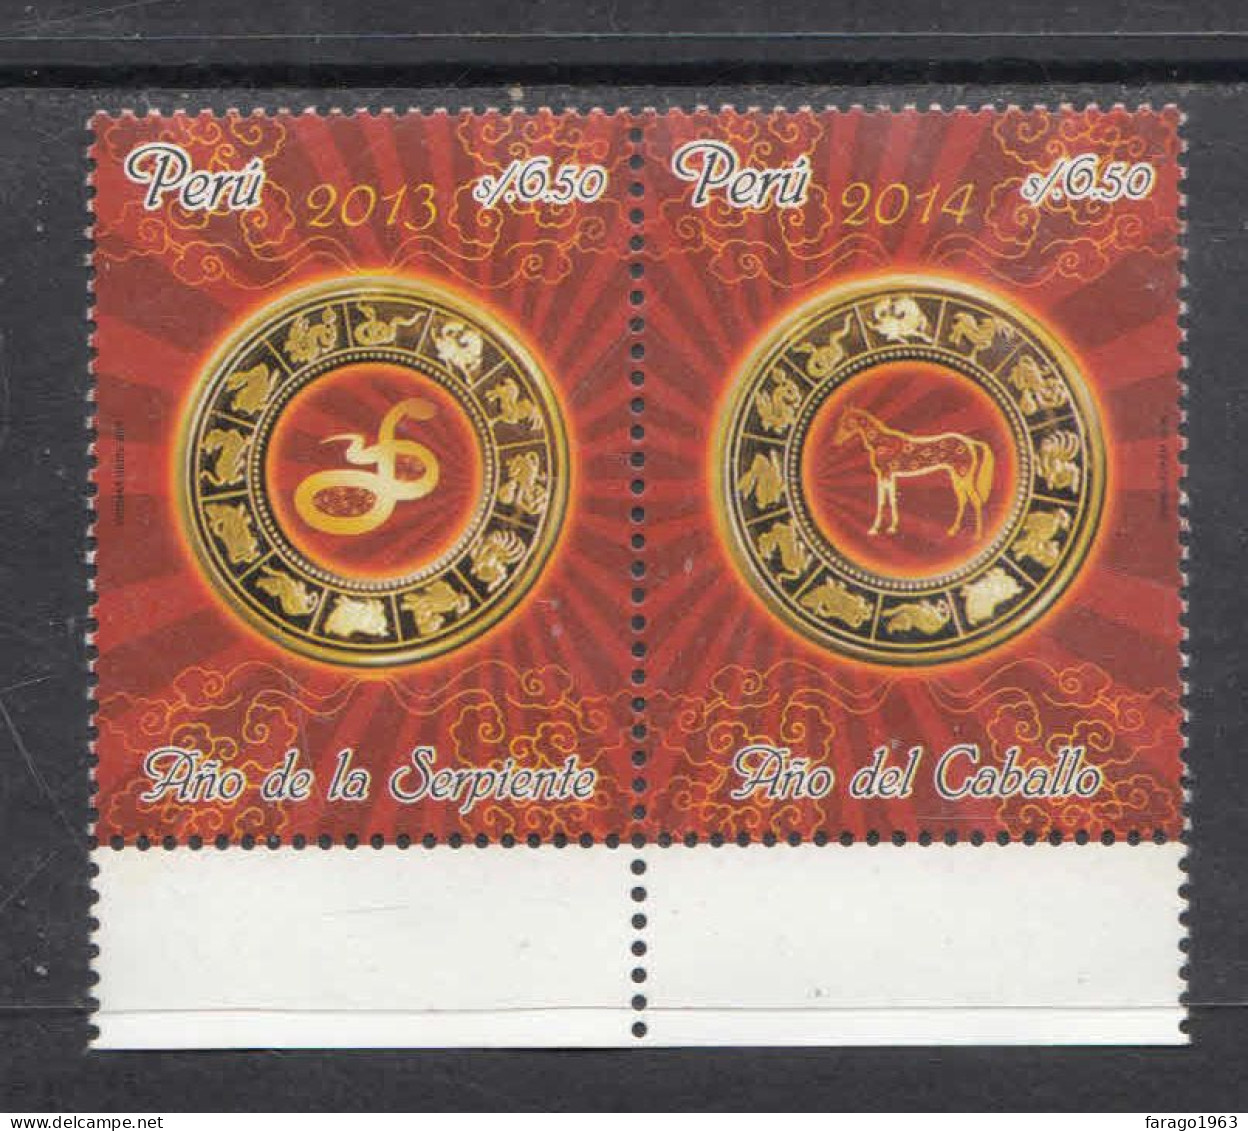 2014 Peru Year Of The Snake Year Of The Horse Complete Pair MNH - Peru